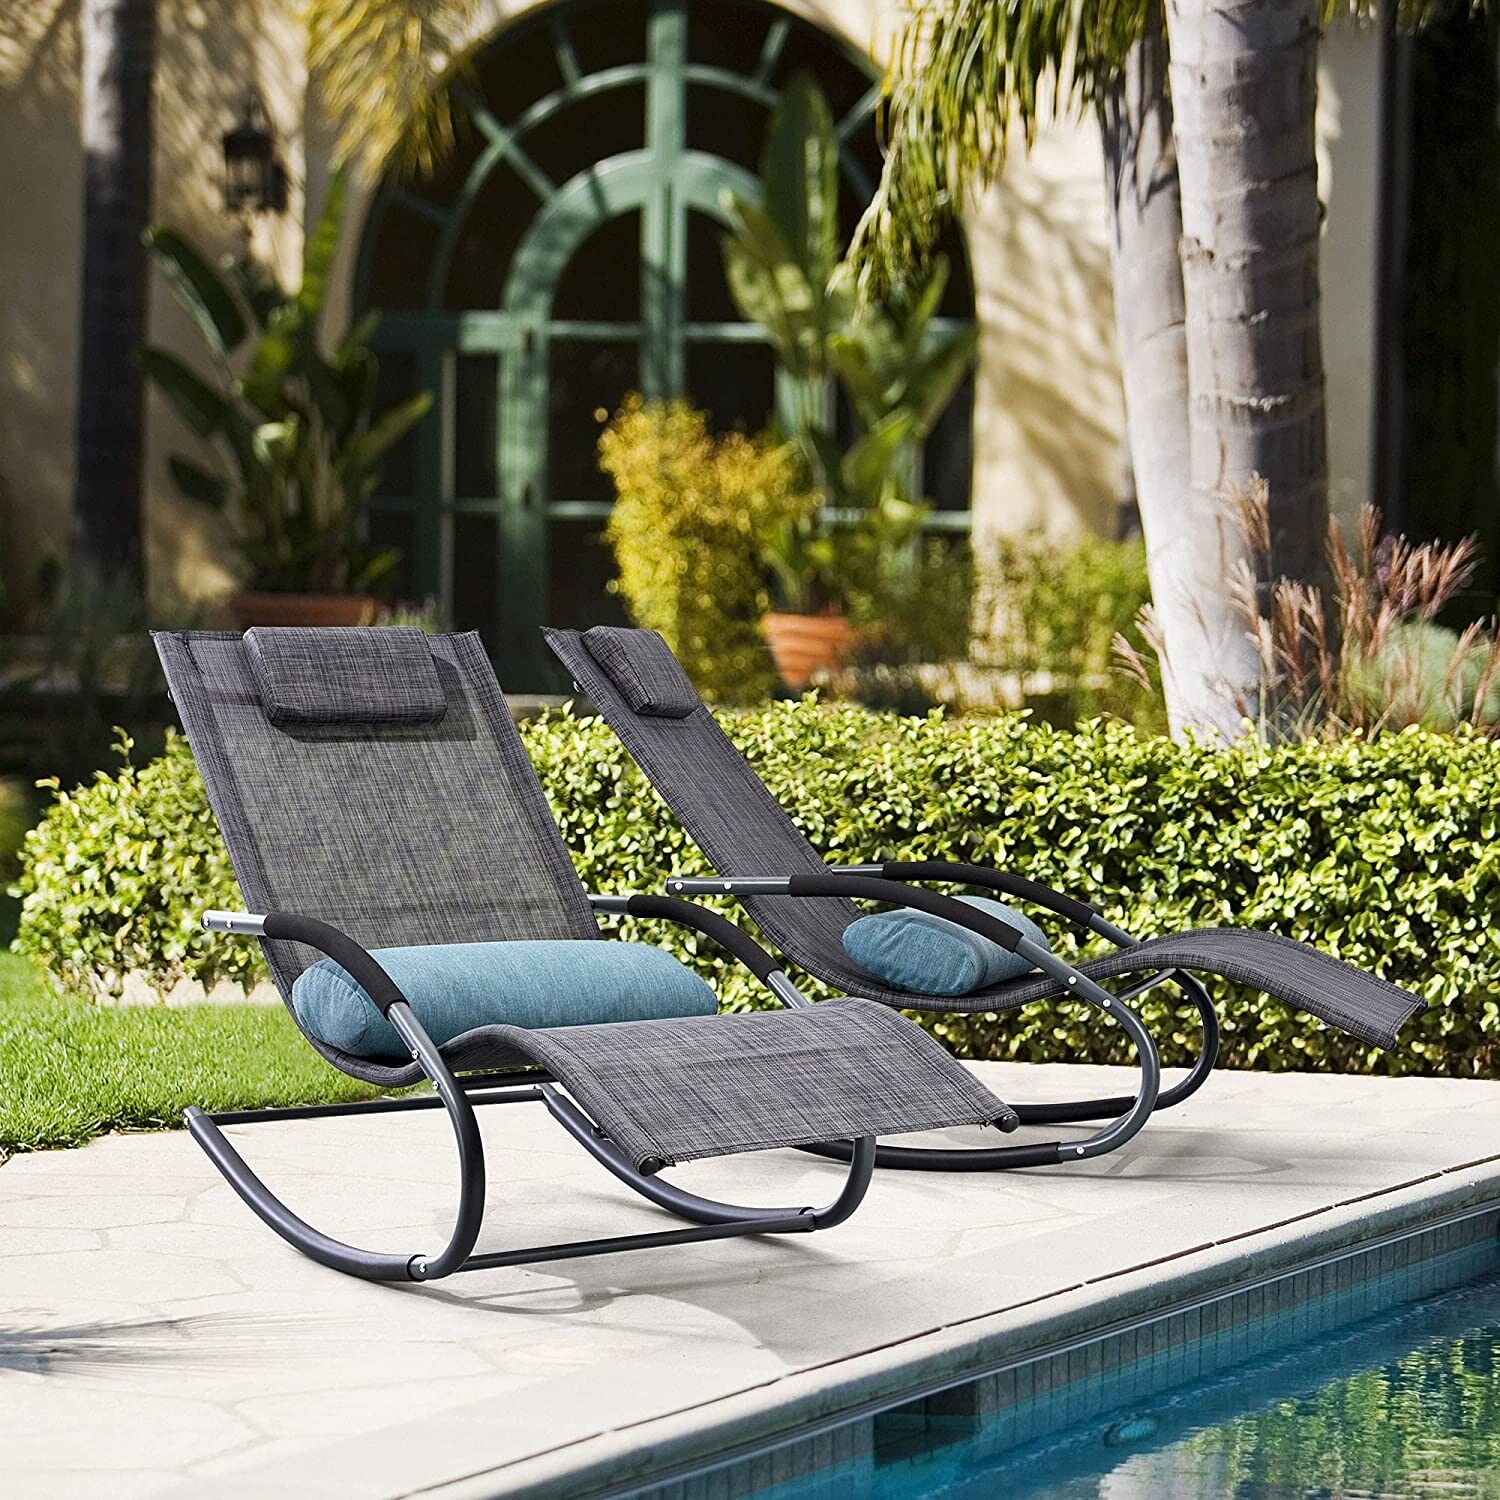 https://ak1.ostkcdn.com/images/products/is/images/direct/60c27afc50e425384619d394e10c564e4f3dca6d/Outdoor-Chaise-Lounge-Steel-Curved-Patio-Rocking-Lounge-Chair-with-Detachable-Pillow-by-Suncreat%28Set-of-2%29.jpg